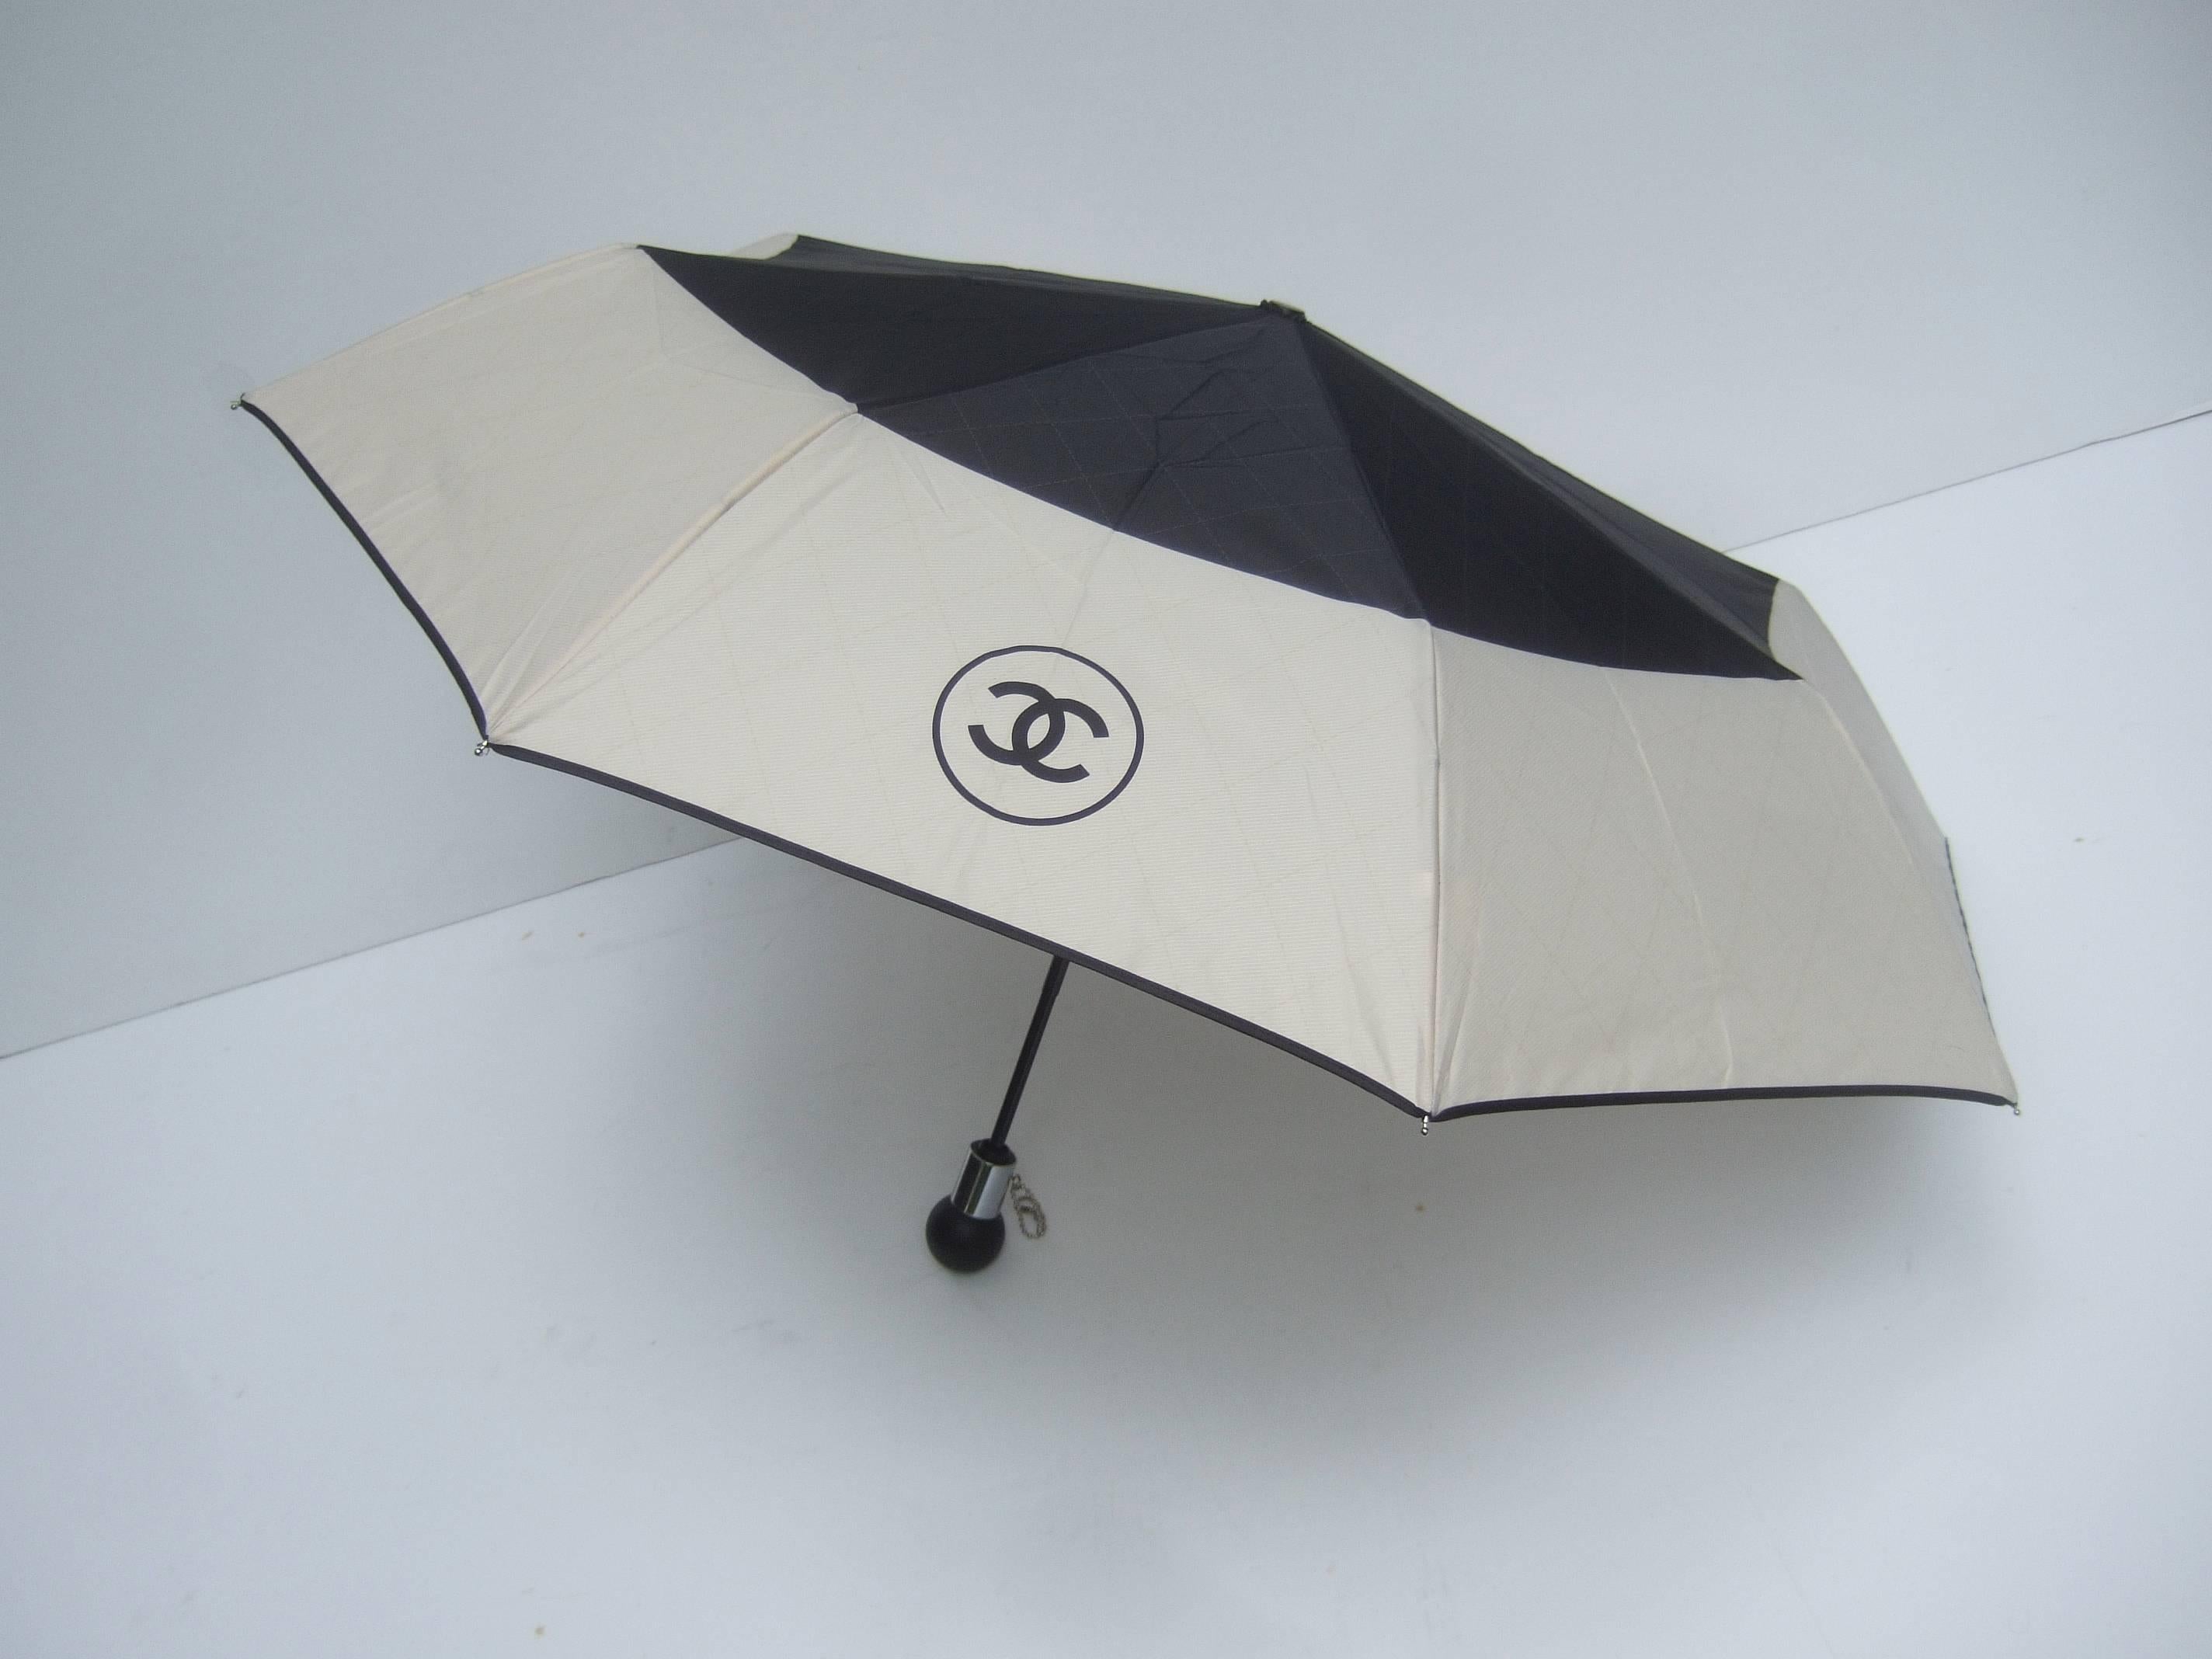 Chanel Stylish black and ivory nylon umbrella in Chanel Box
The chic umbrella comes with a quilted nylon cylinder carrying
case on a silver metal shoulder strap chain

The umbrella can be carried in the black quilted carrying case
The quilted